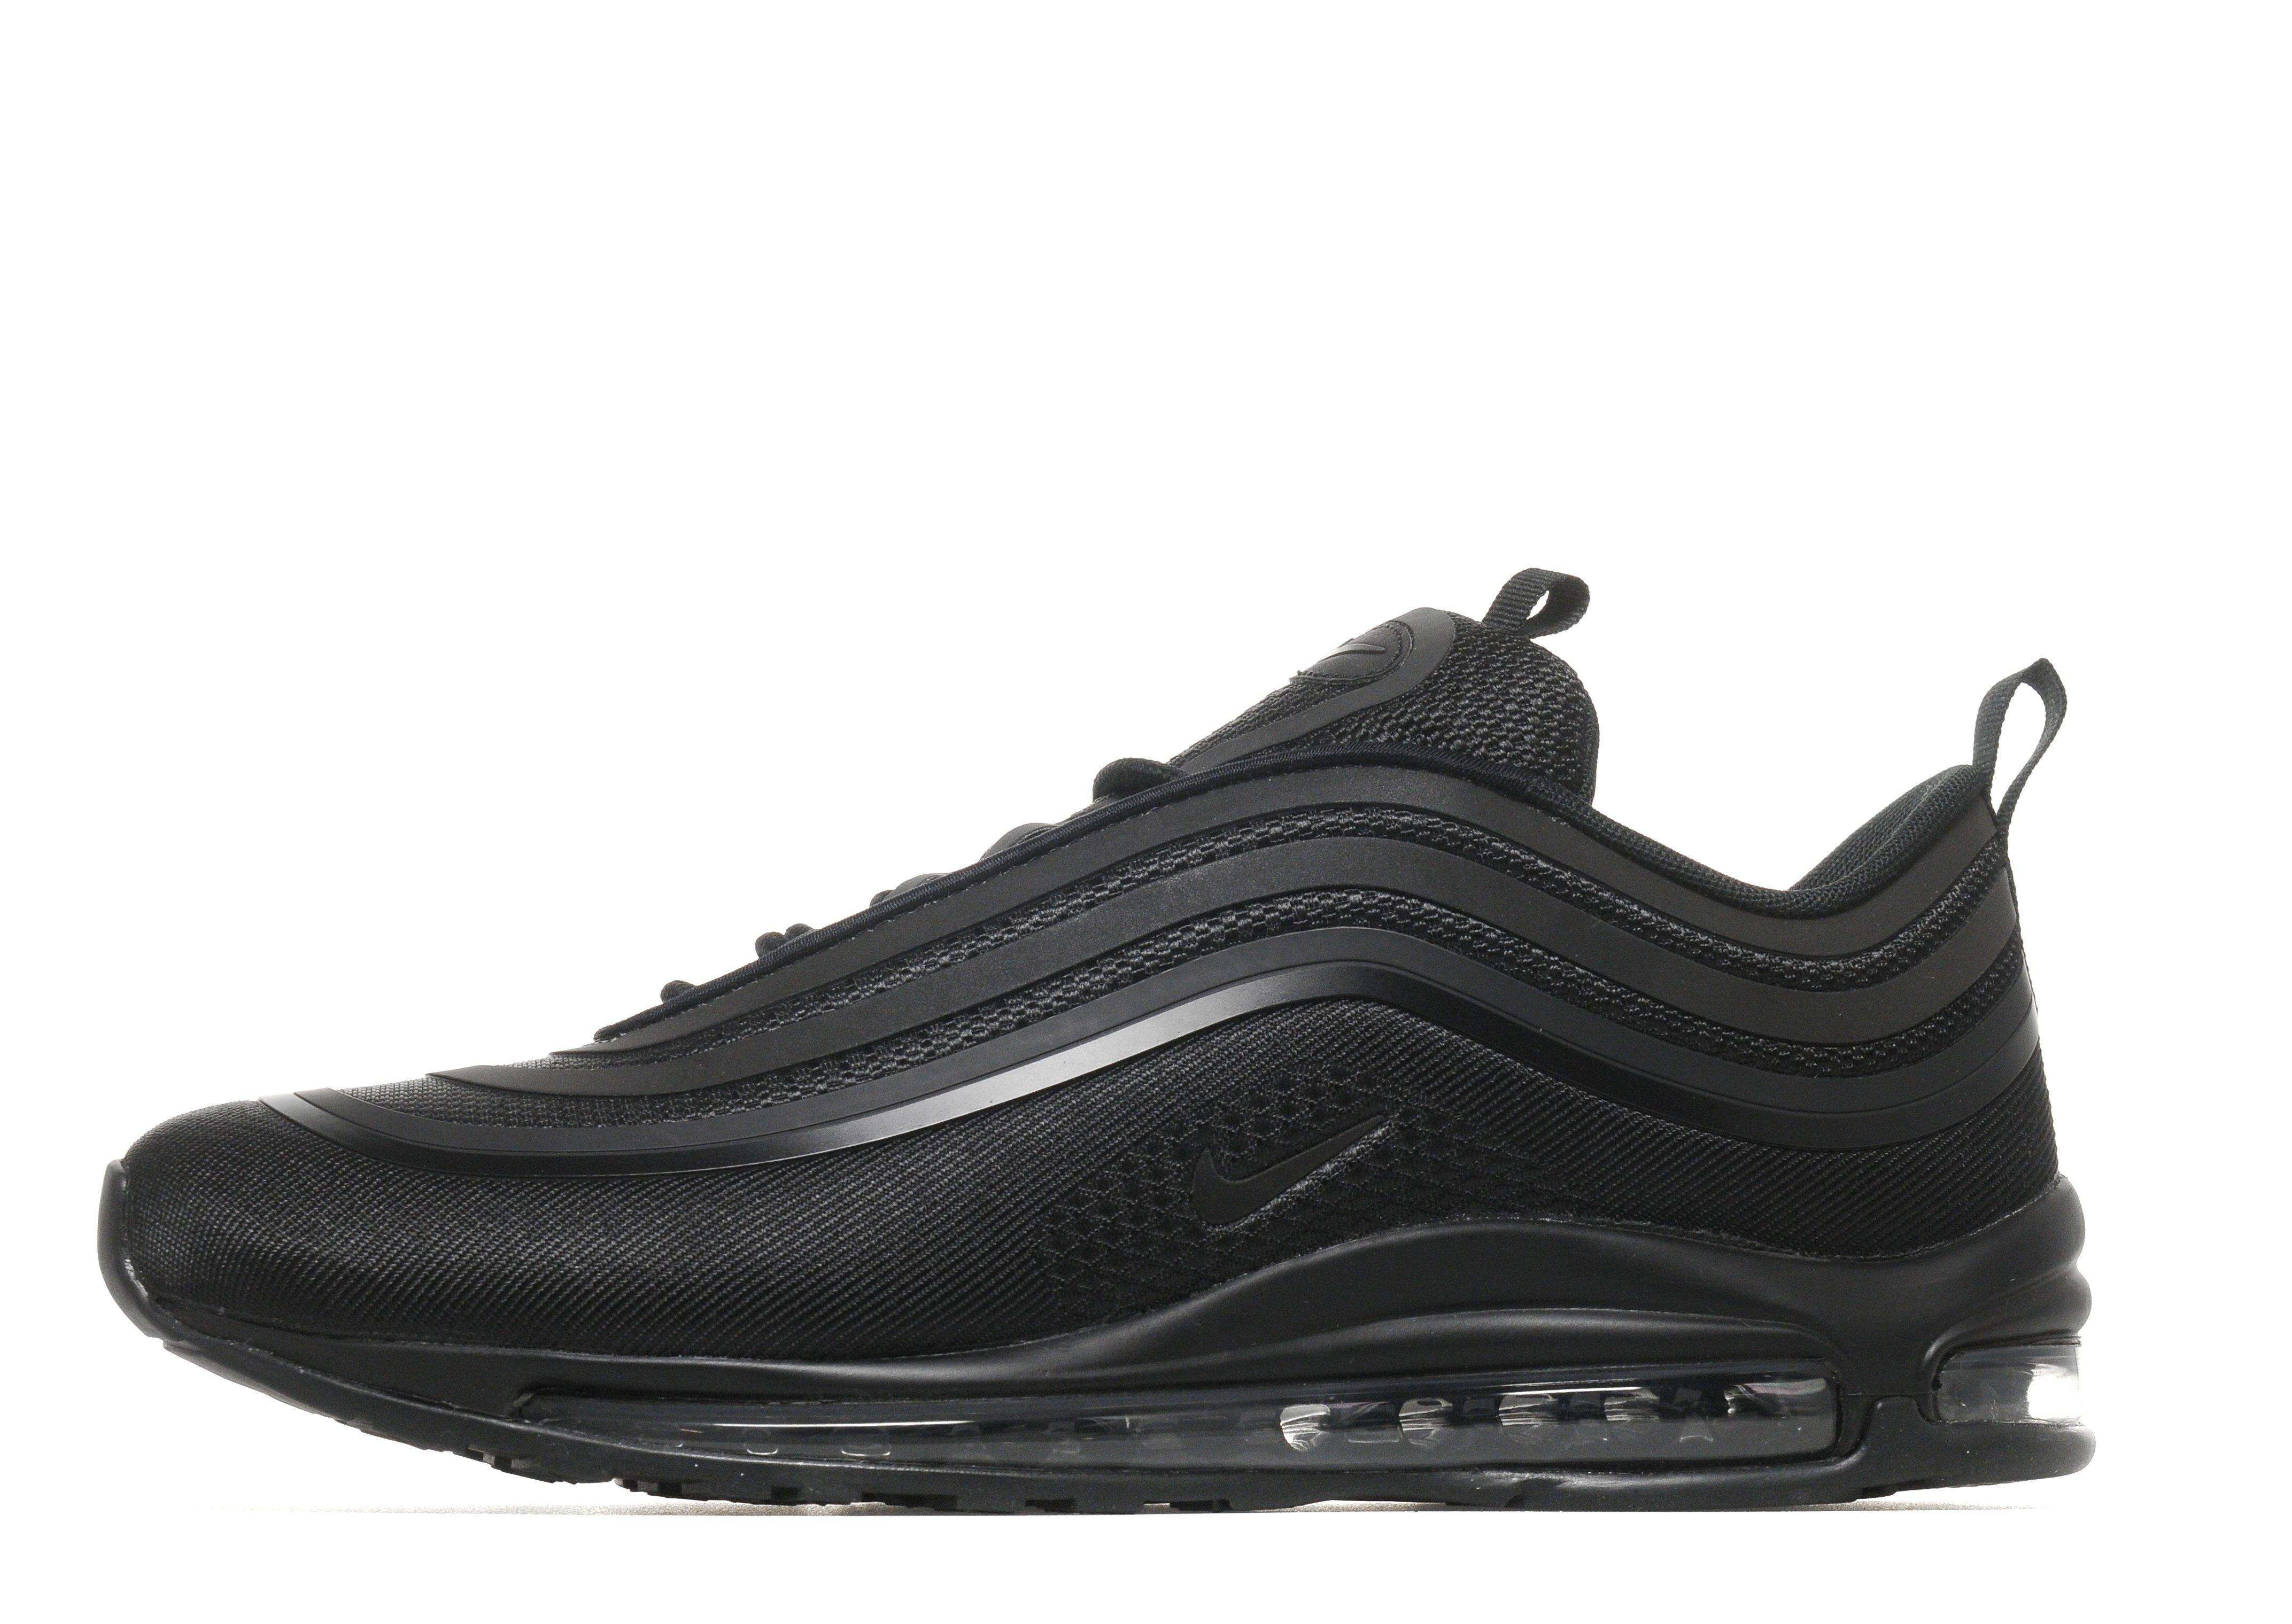 jd sports nike 97 where to buy d14a9 51ac0